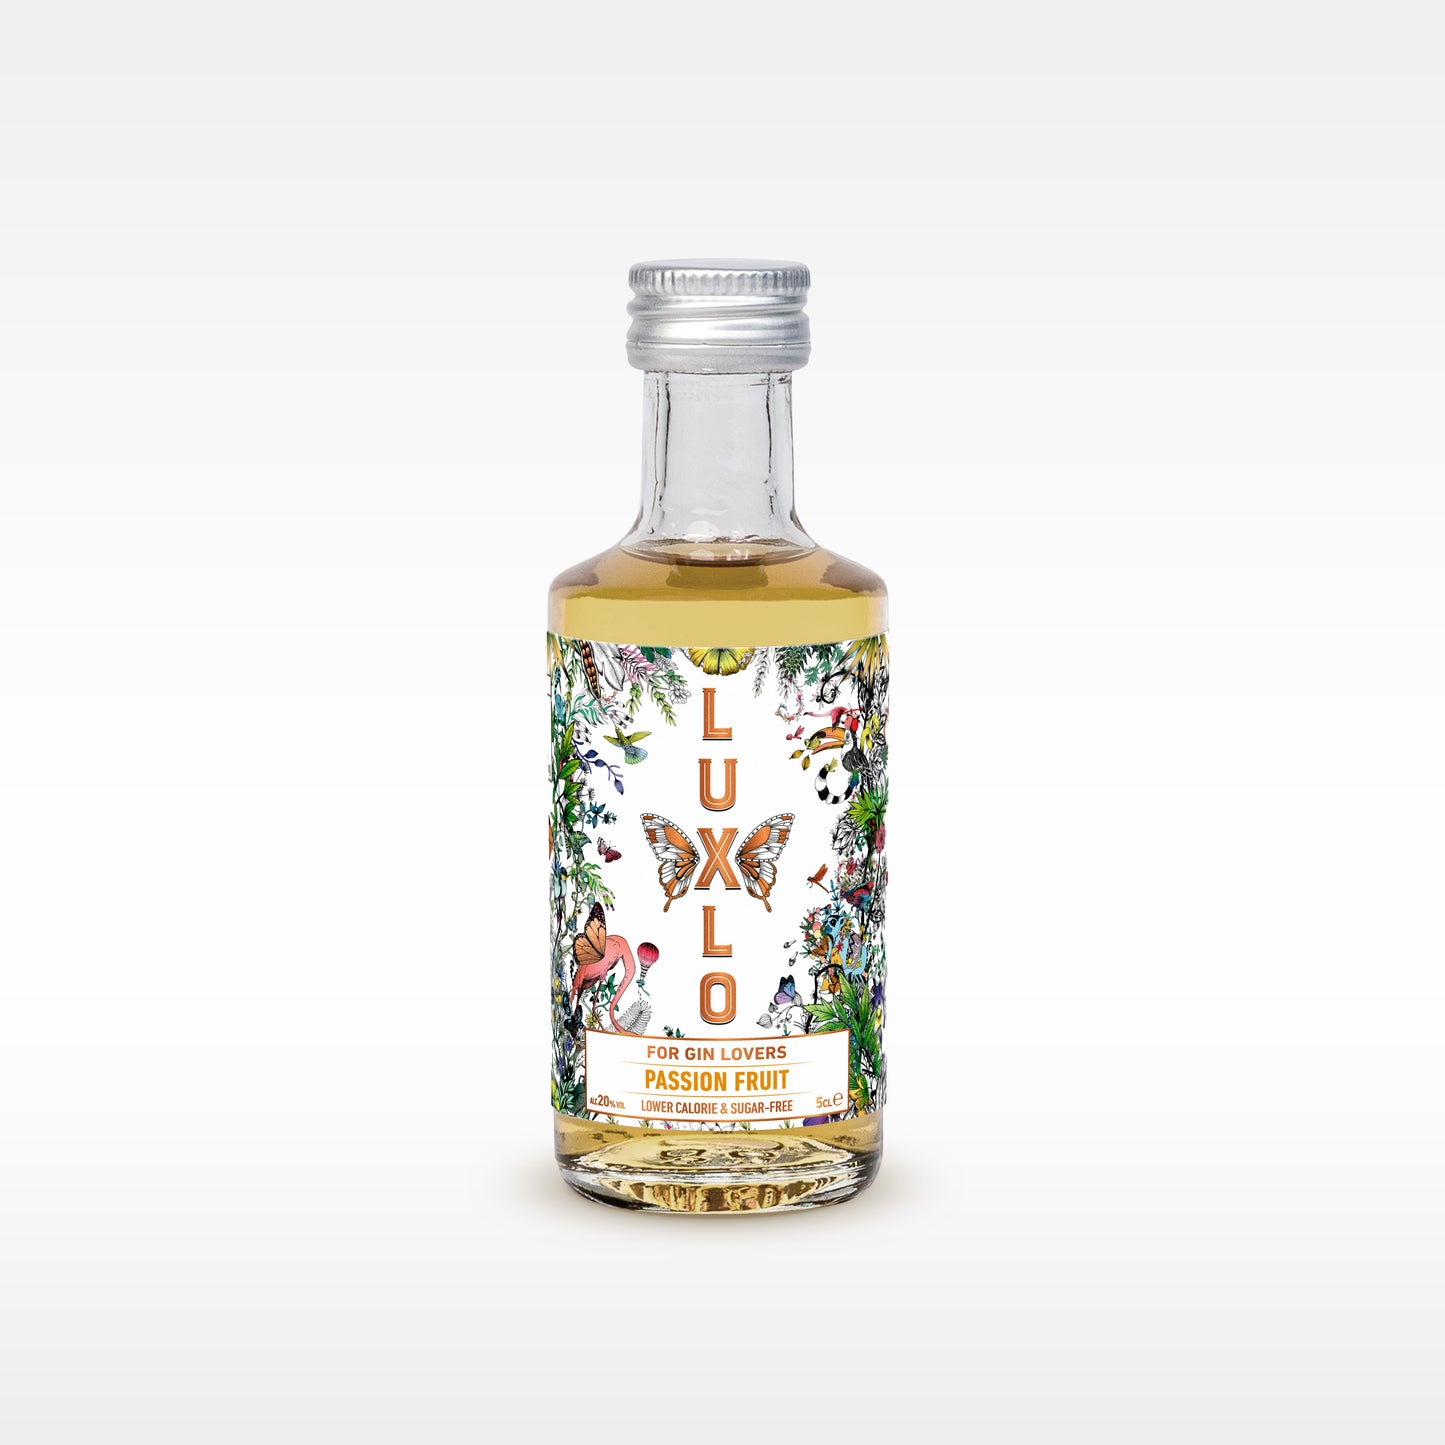 LUXLO Passion Fruit for Gin Lovers Miniature